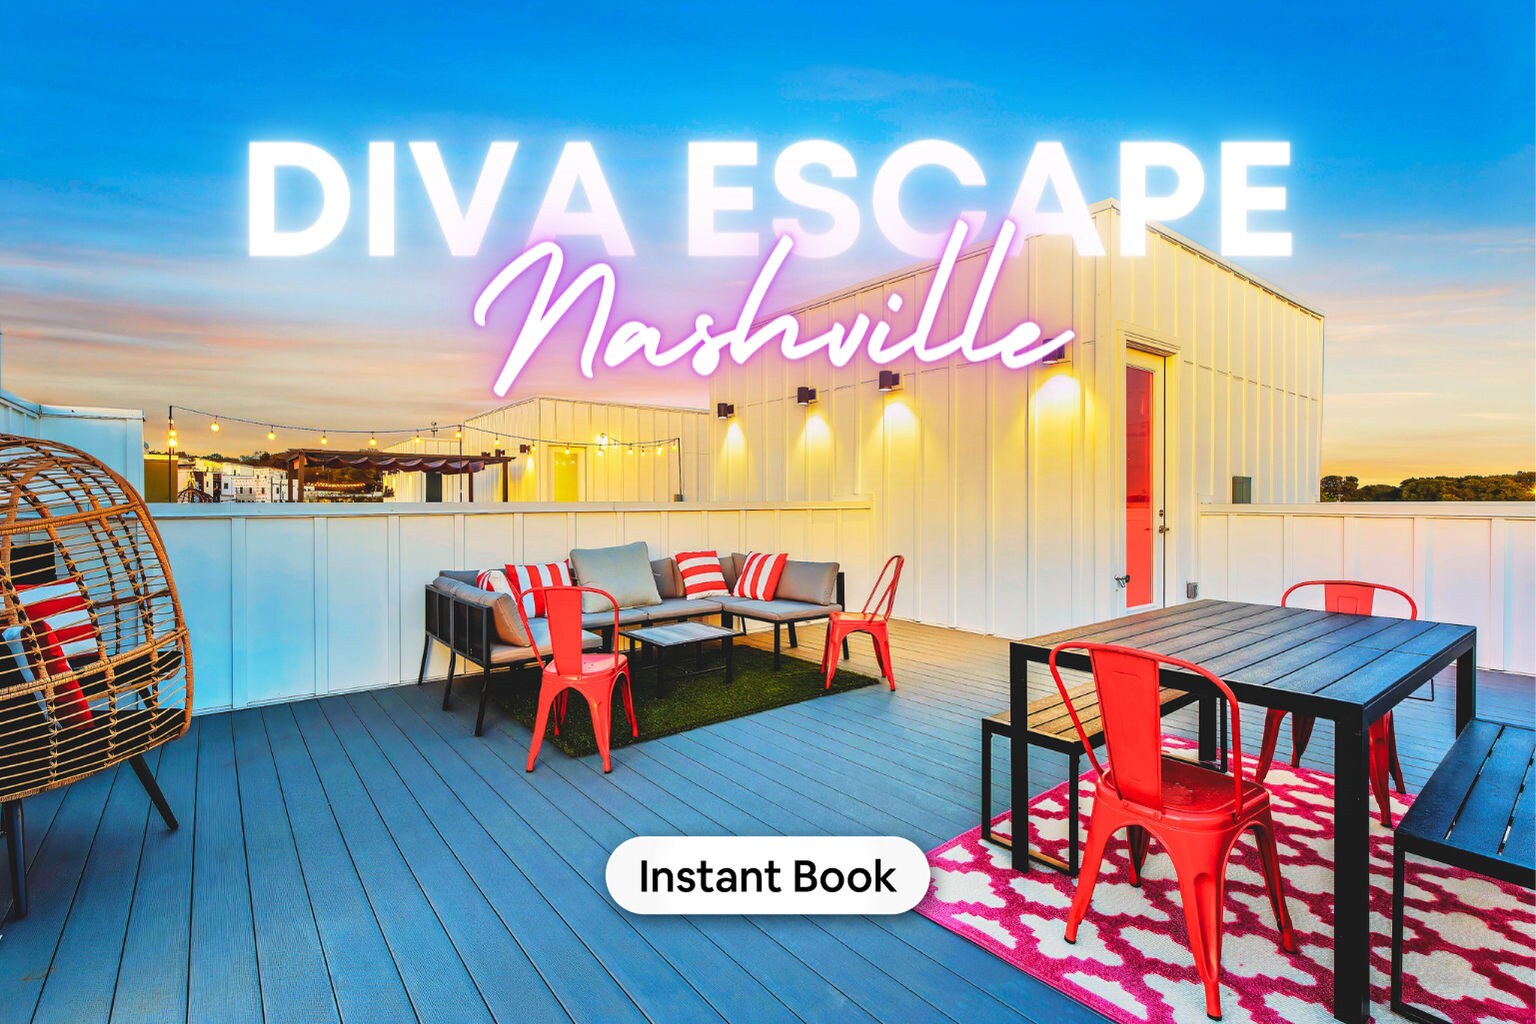 Gather your friends for a stunning Music City sunset on our luxury rooftop deck at 'Diva Escape Nashville'! Perfect for your next Nashville bachelorette bash or family vacation, this chic vacation rental invites you to lounge, laugh, and make memories. Don't just dream of the perfect getaway; make it happen with Misfit Homes. 🌆✨ Ready to live it up in style? Click to book your ultimate Nashville vacation now!